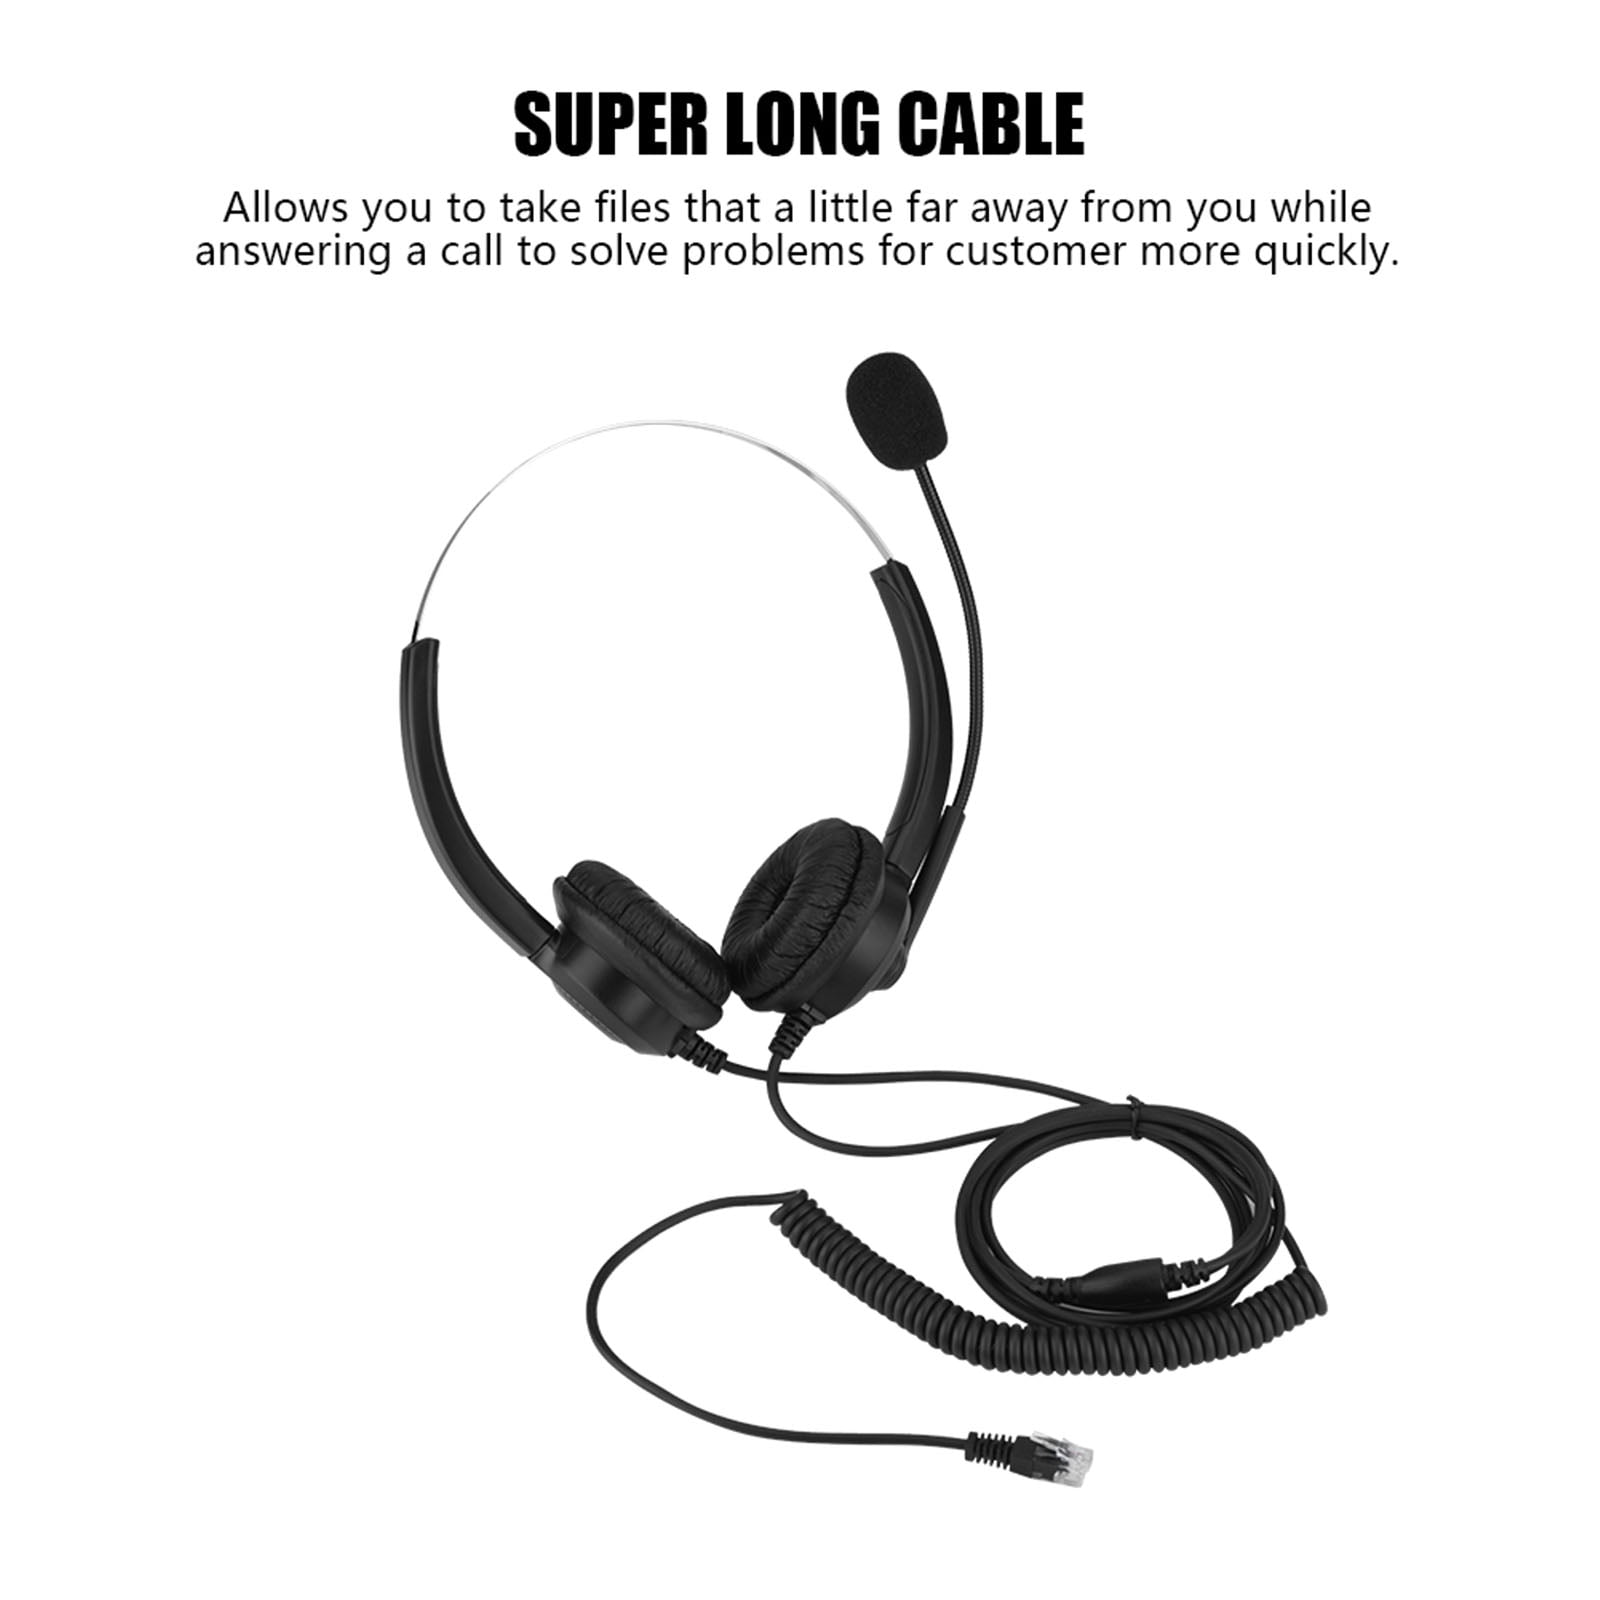 Telephone Customer Service c3220 Headset with Microphone Instant Call Software Office Headset Over The Head Earpiece,Applicable to Skype 